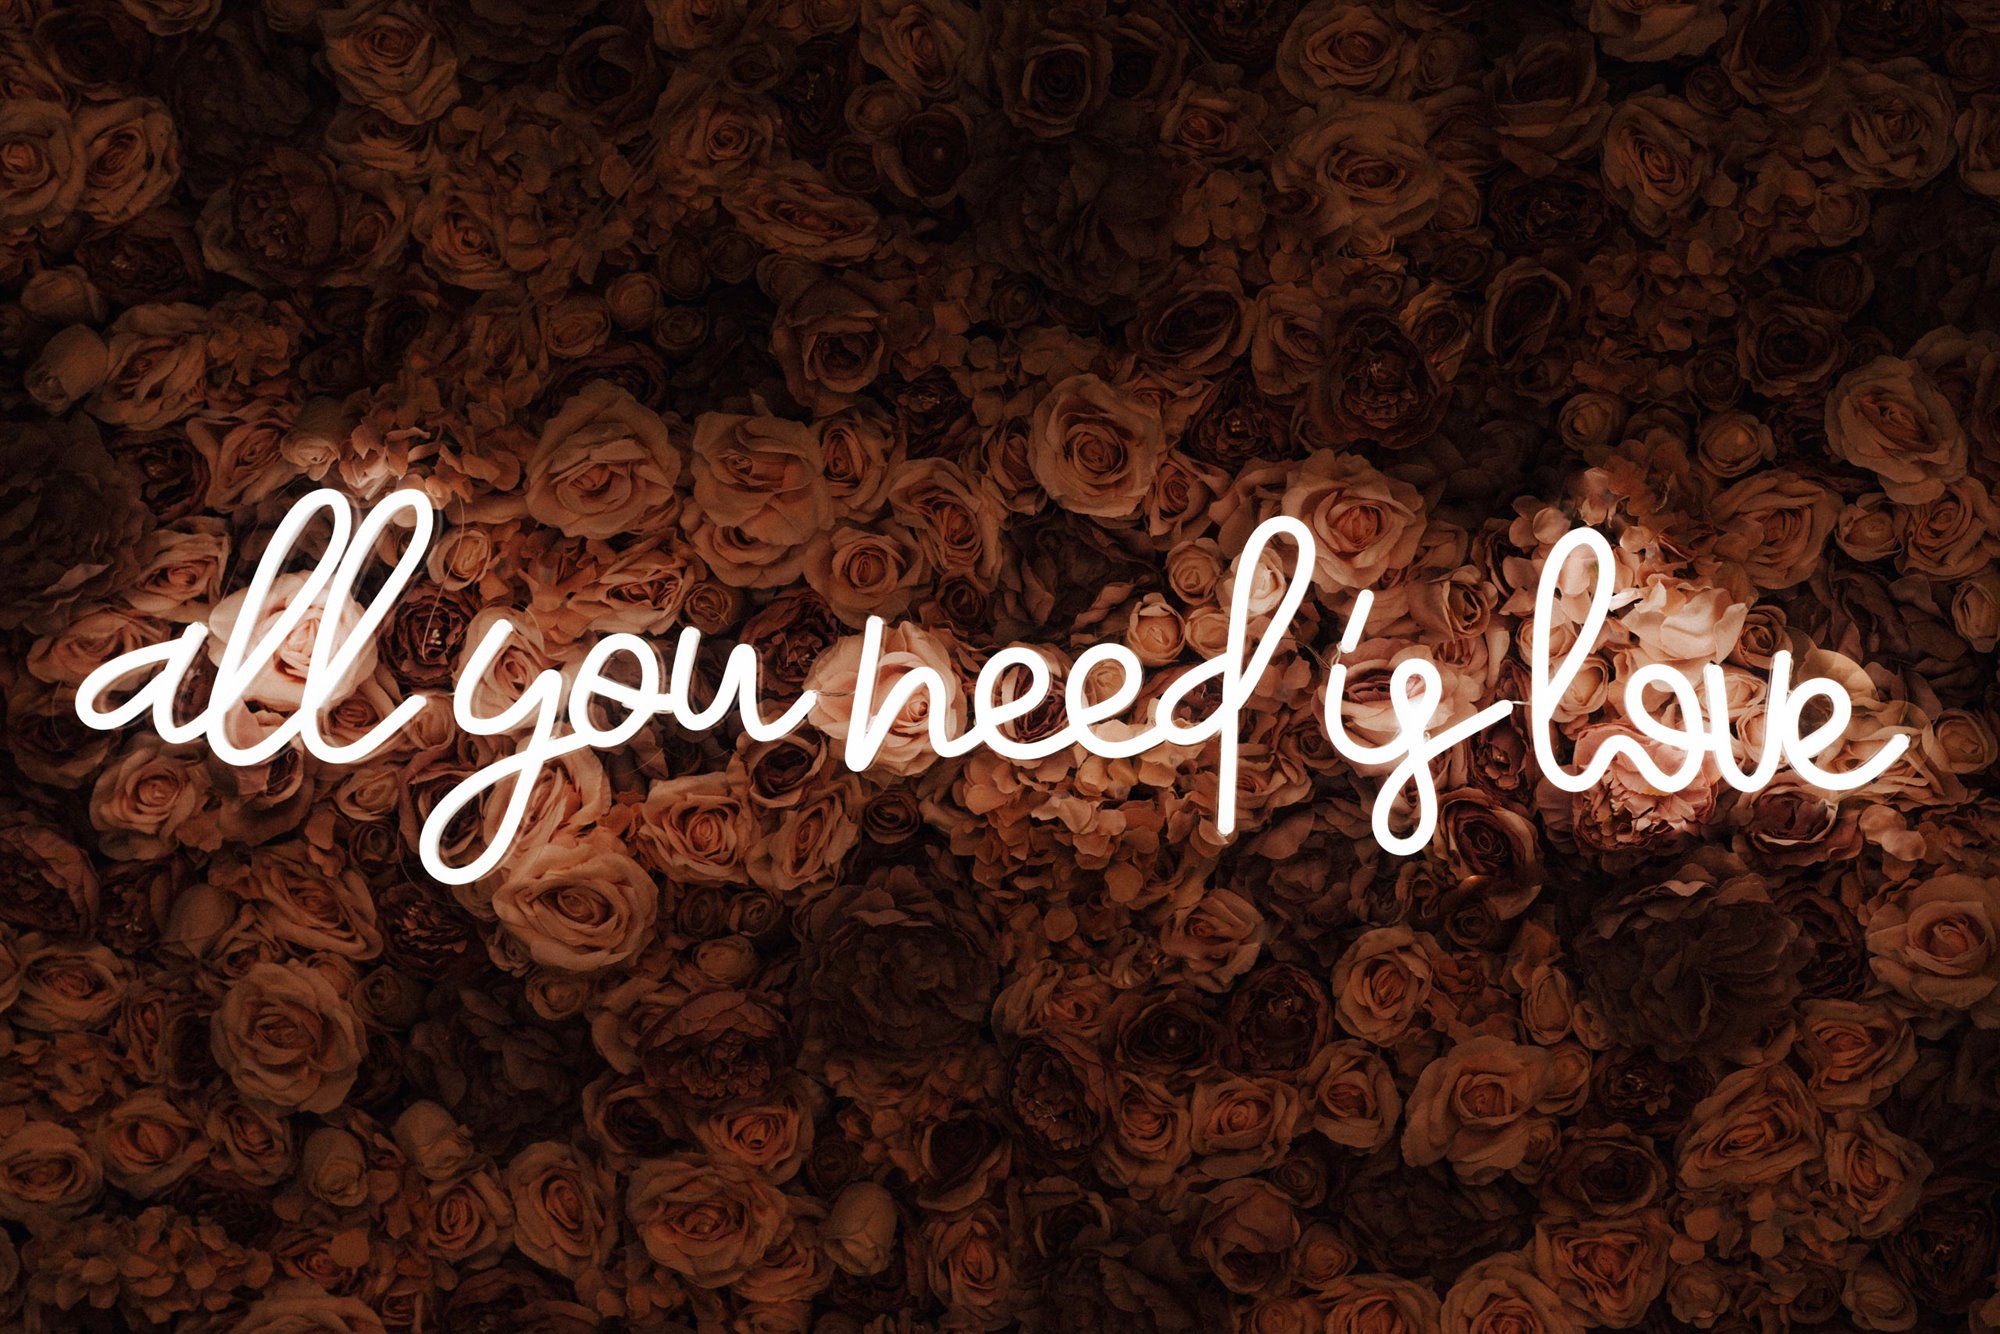 Neon all you need is love sign set against a backing of roses